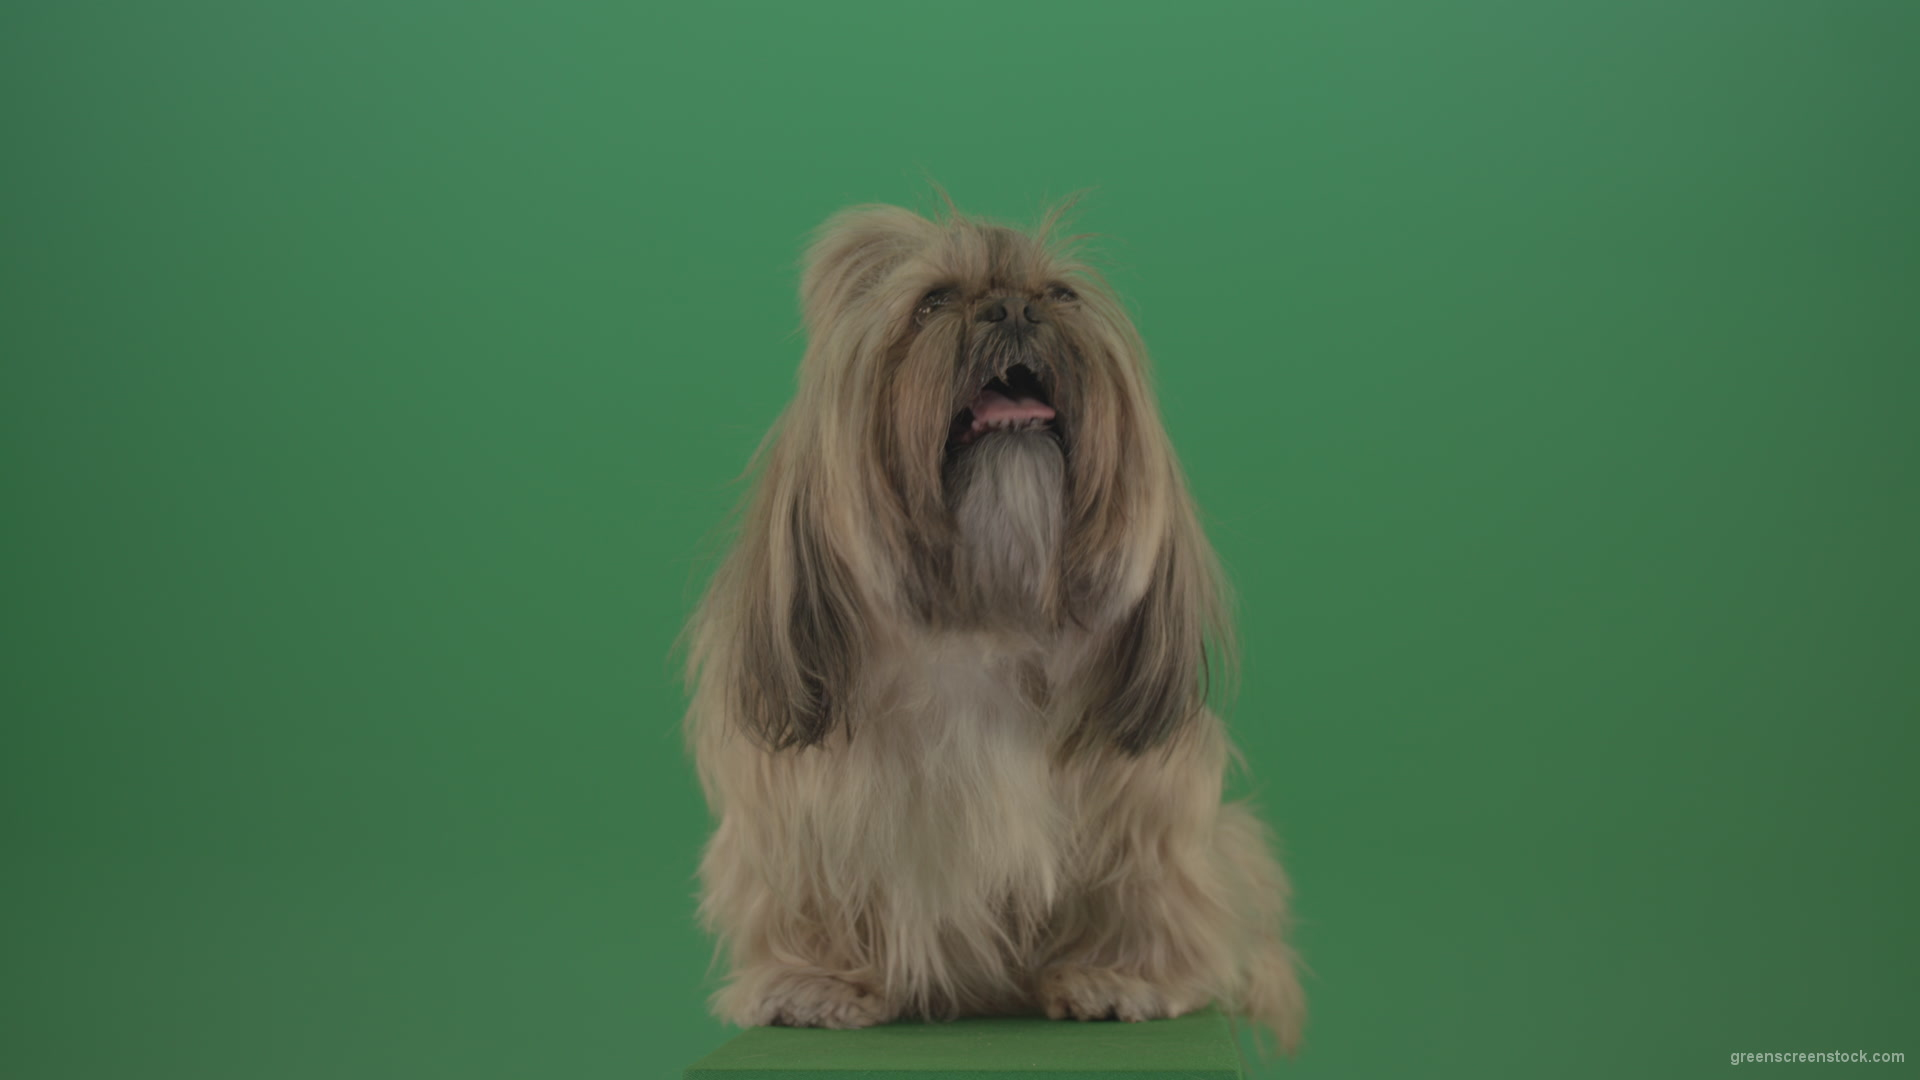 Green-Screen-Animal-Shihtzu-Small-toy-dog-is-yawling-on-chromakey-background-isolated-4K_001 Green Screen Stock